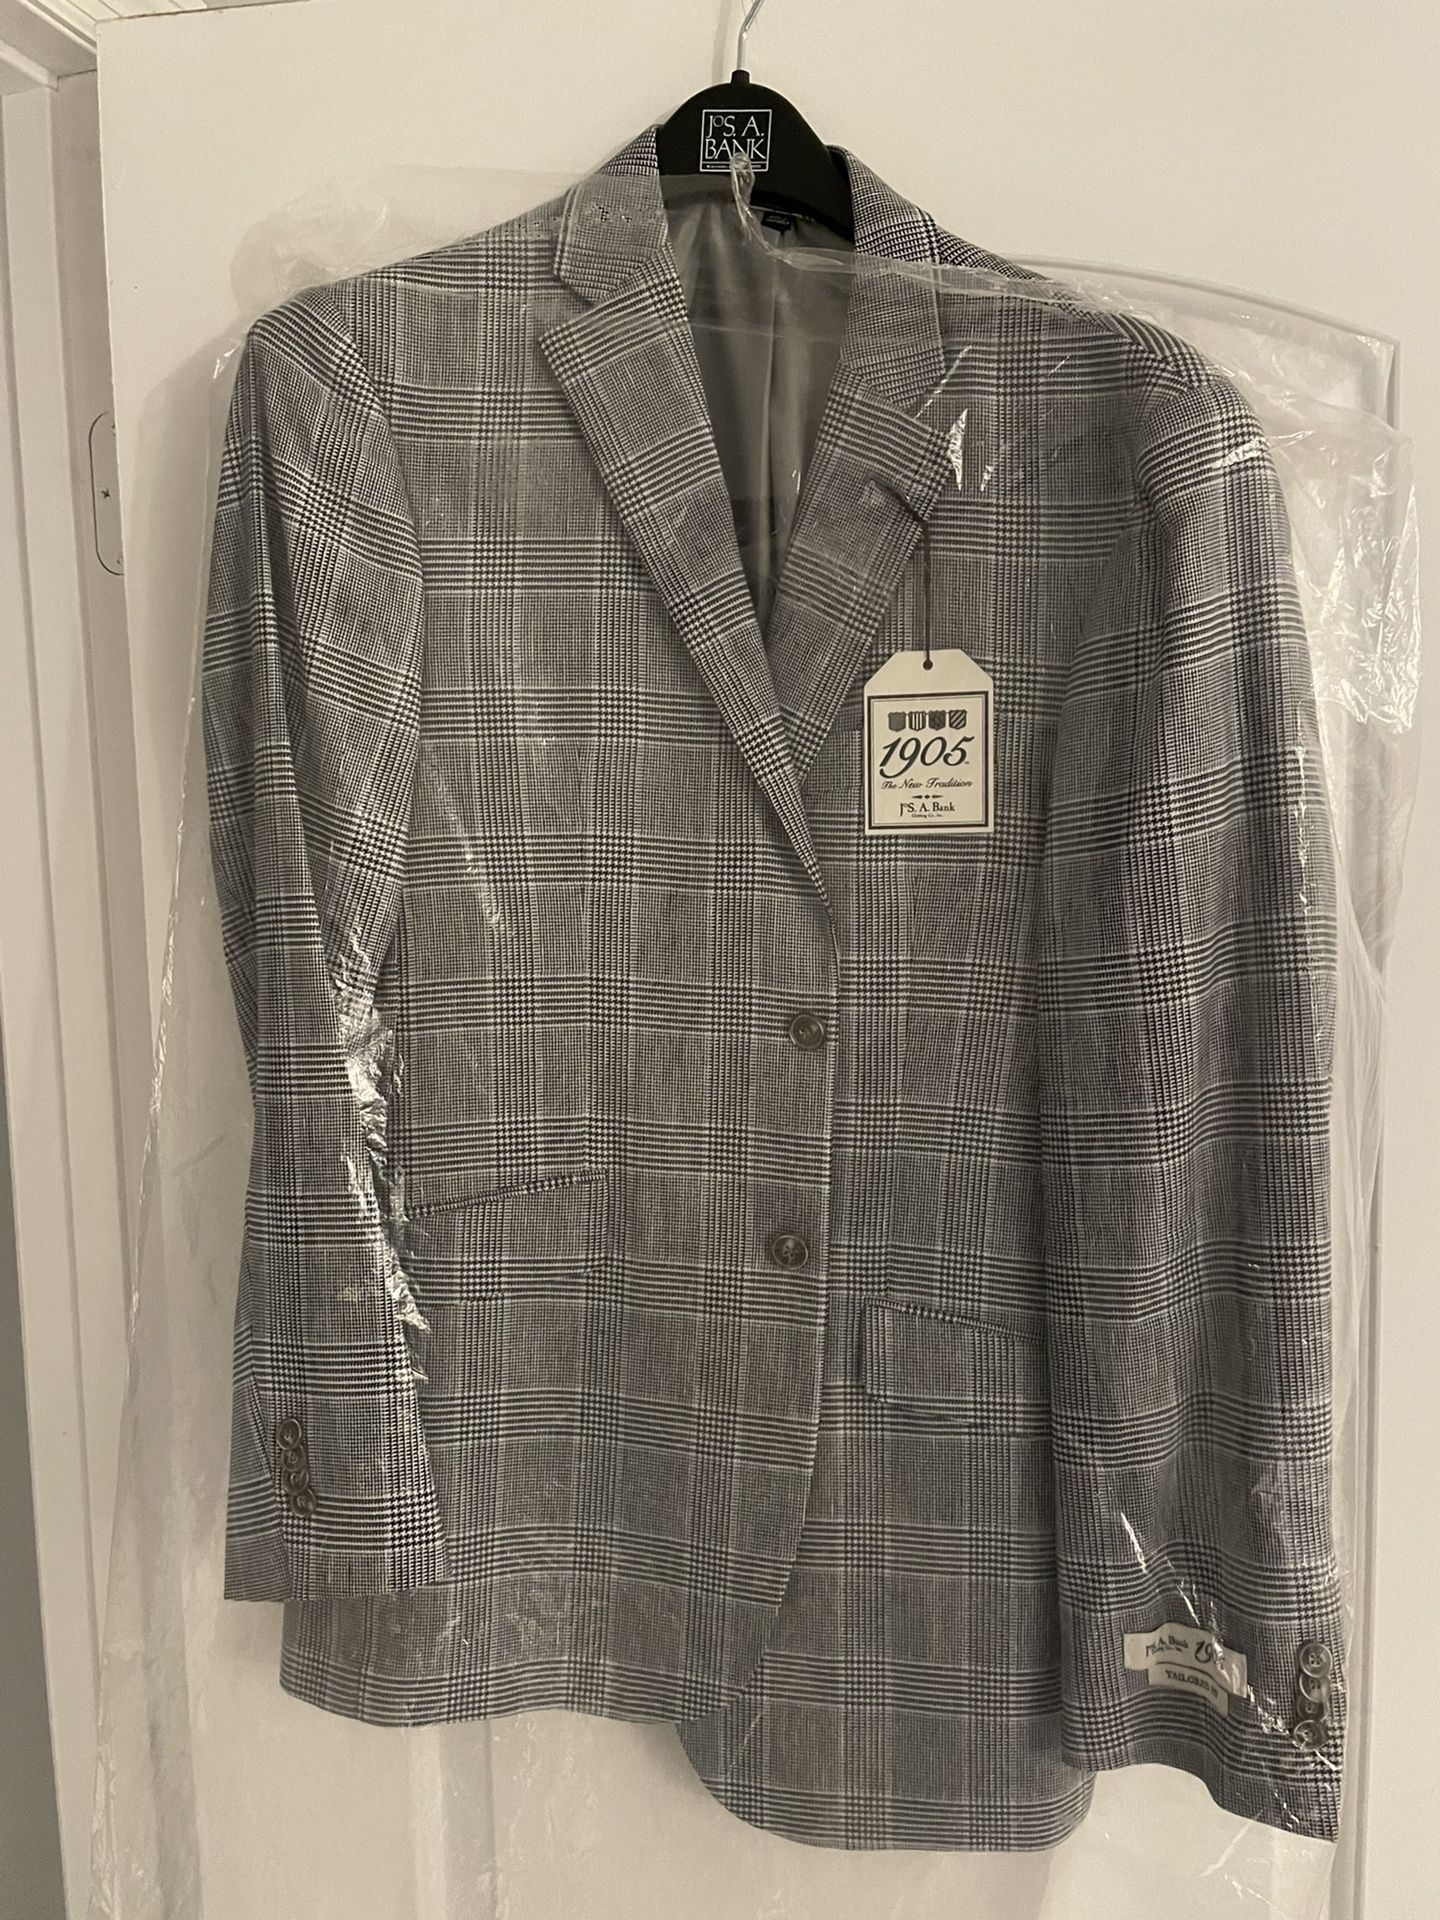 New Never Worn Jos A Bank Suit Jacket 36R